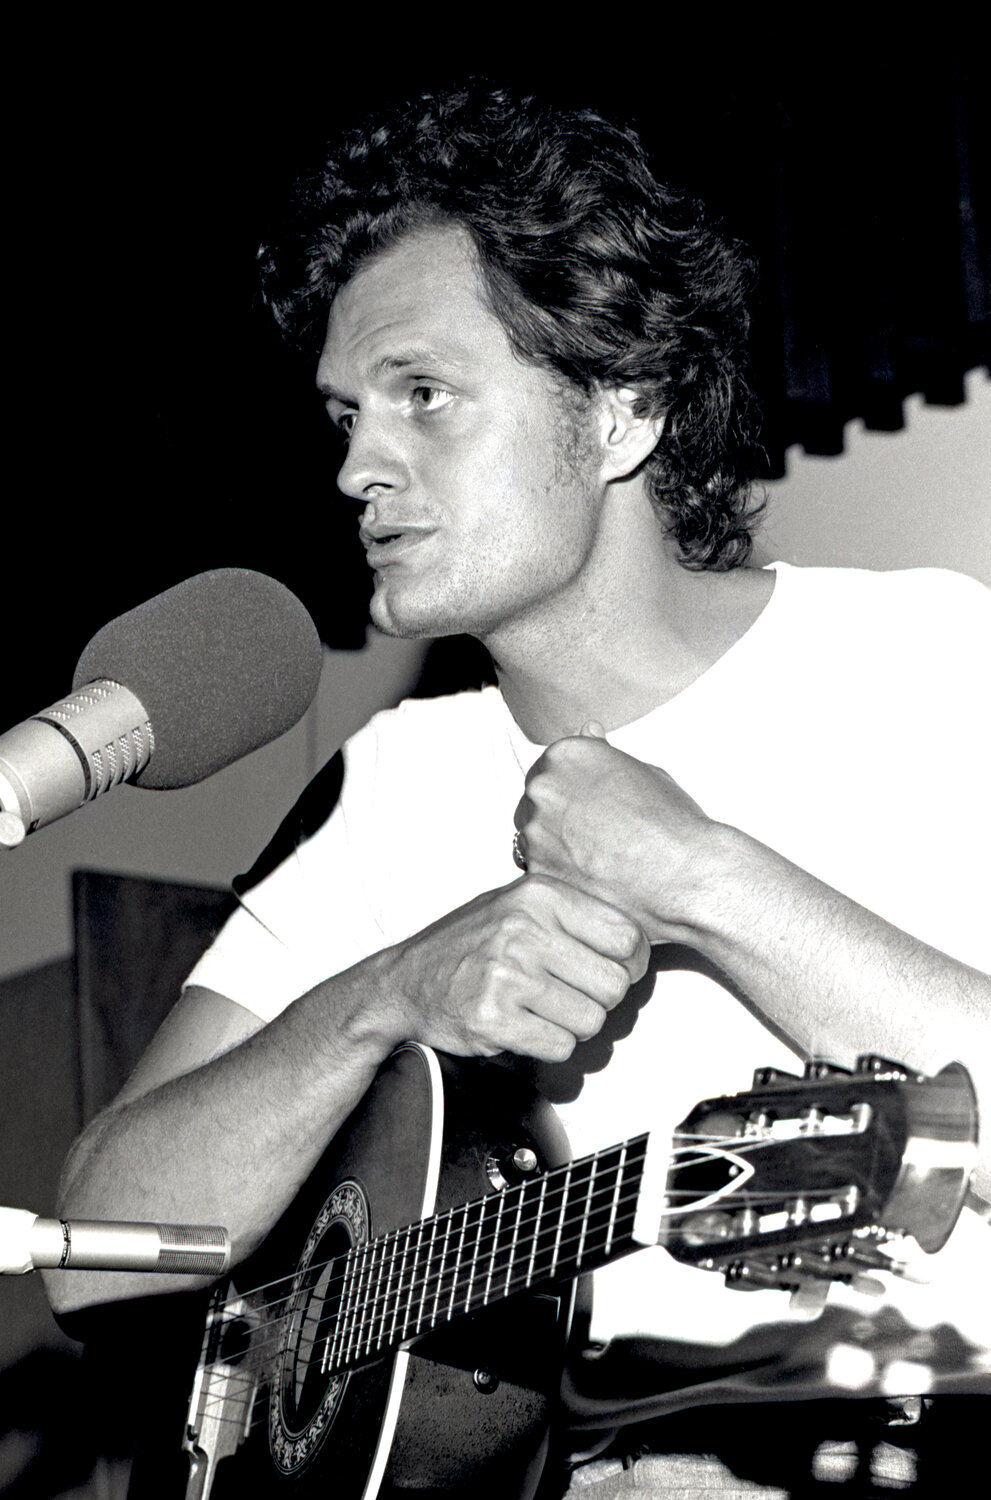 Steve Orlando has taken thousands of professional pictures for big names in the music business, among them this picture of Harry Chapin. But he said the assignments closest to his heart are the ones where he creates memories for people. He’s been photographing